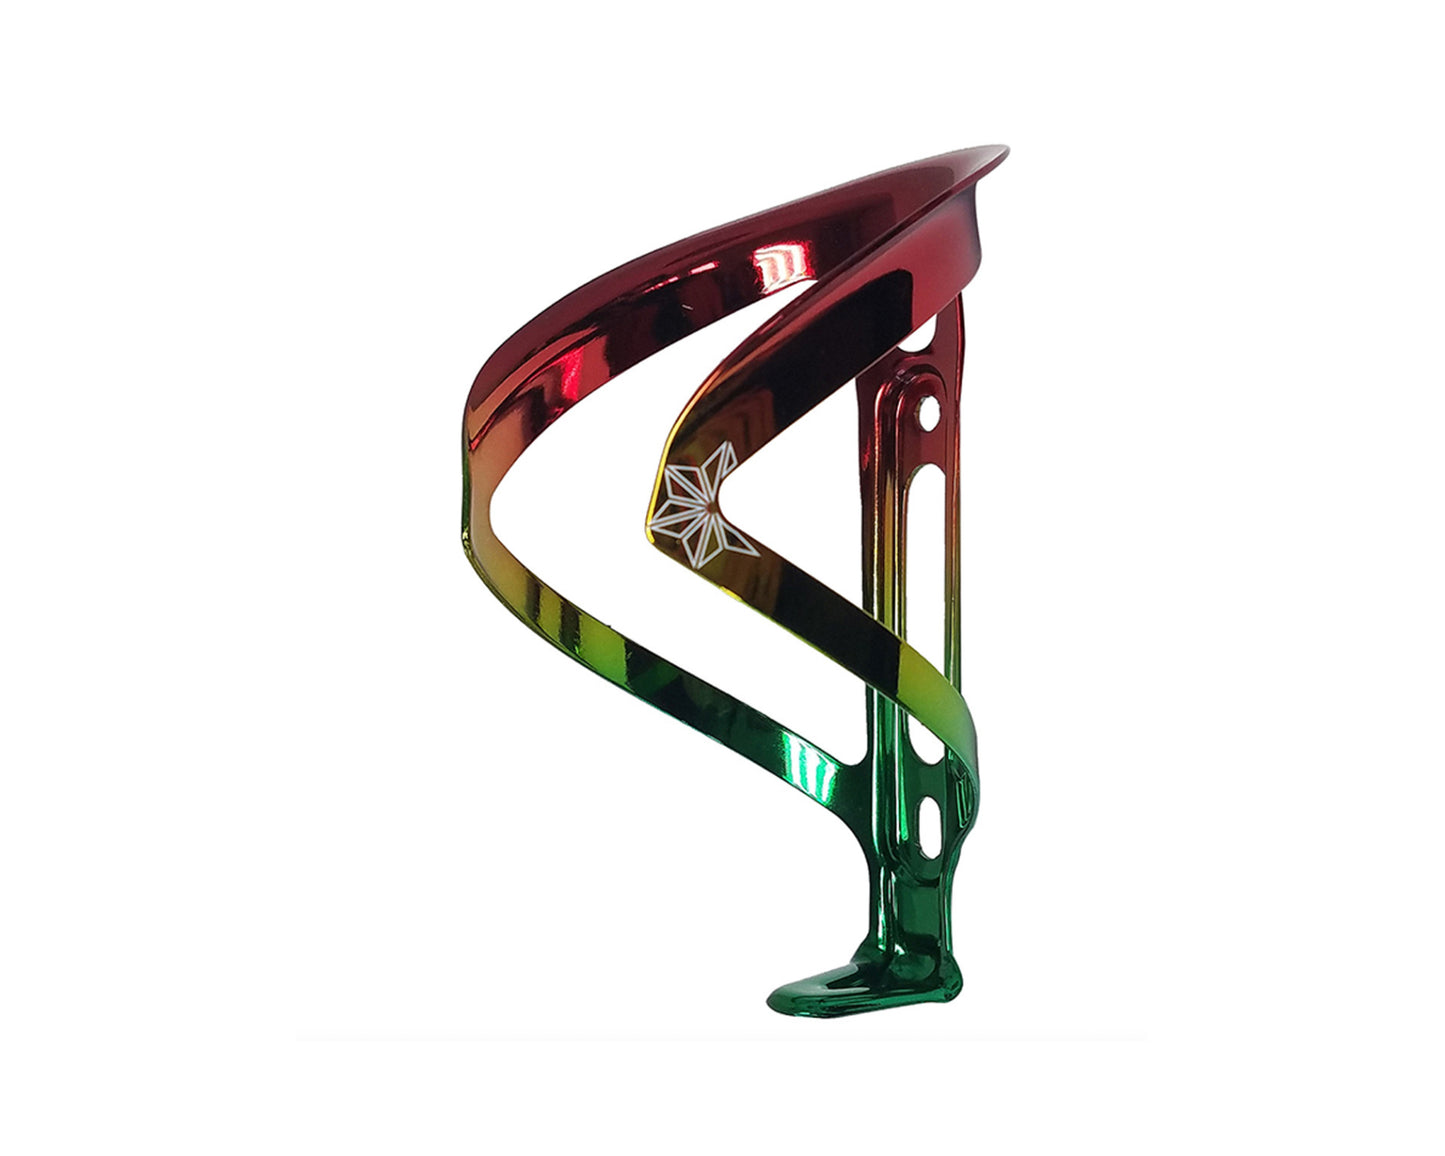 BOTTLE CAGE SUPACAZ FLY CAGE ALY ZION